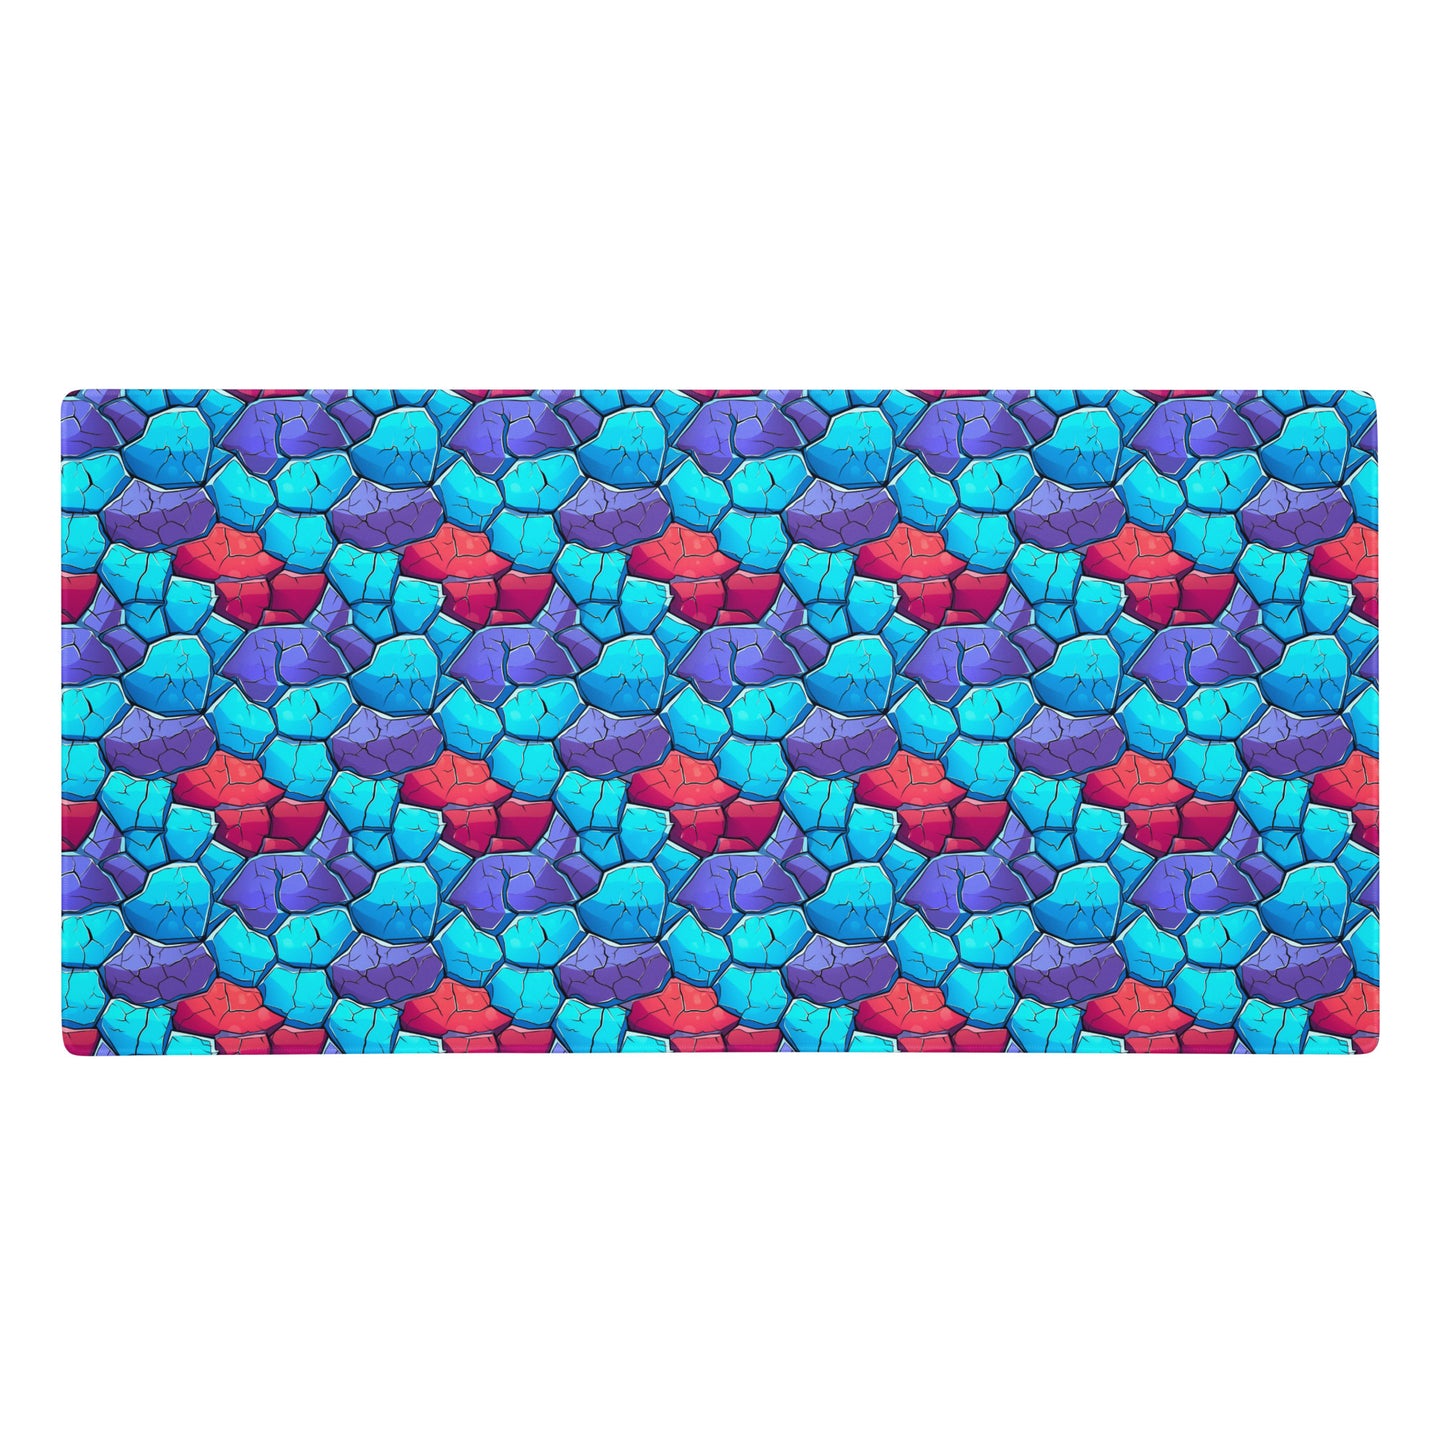 A 36" x 18" gaming desk pad with blue, red, and purple crystals.